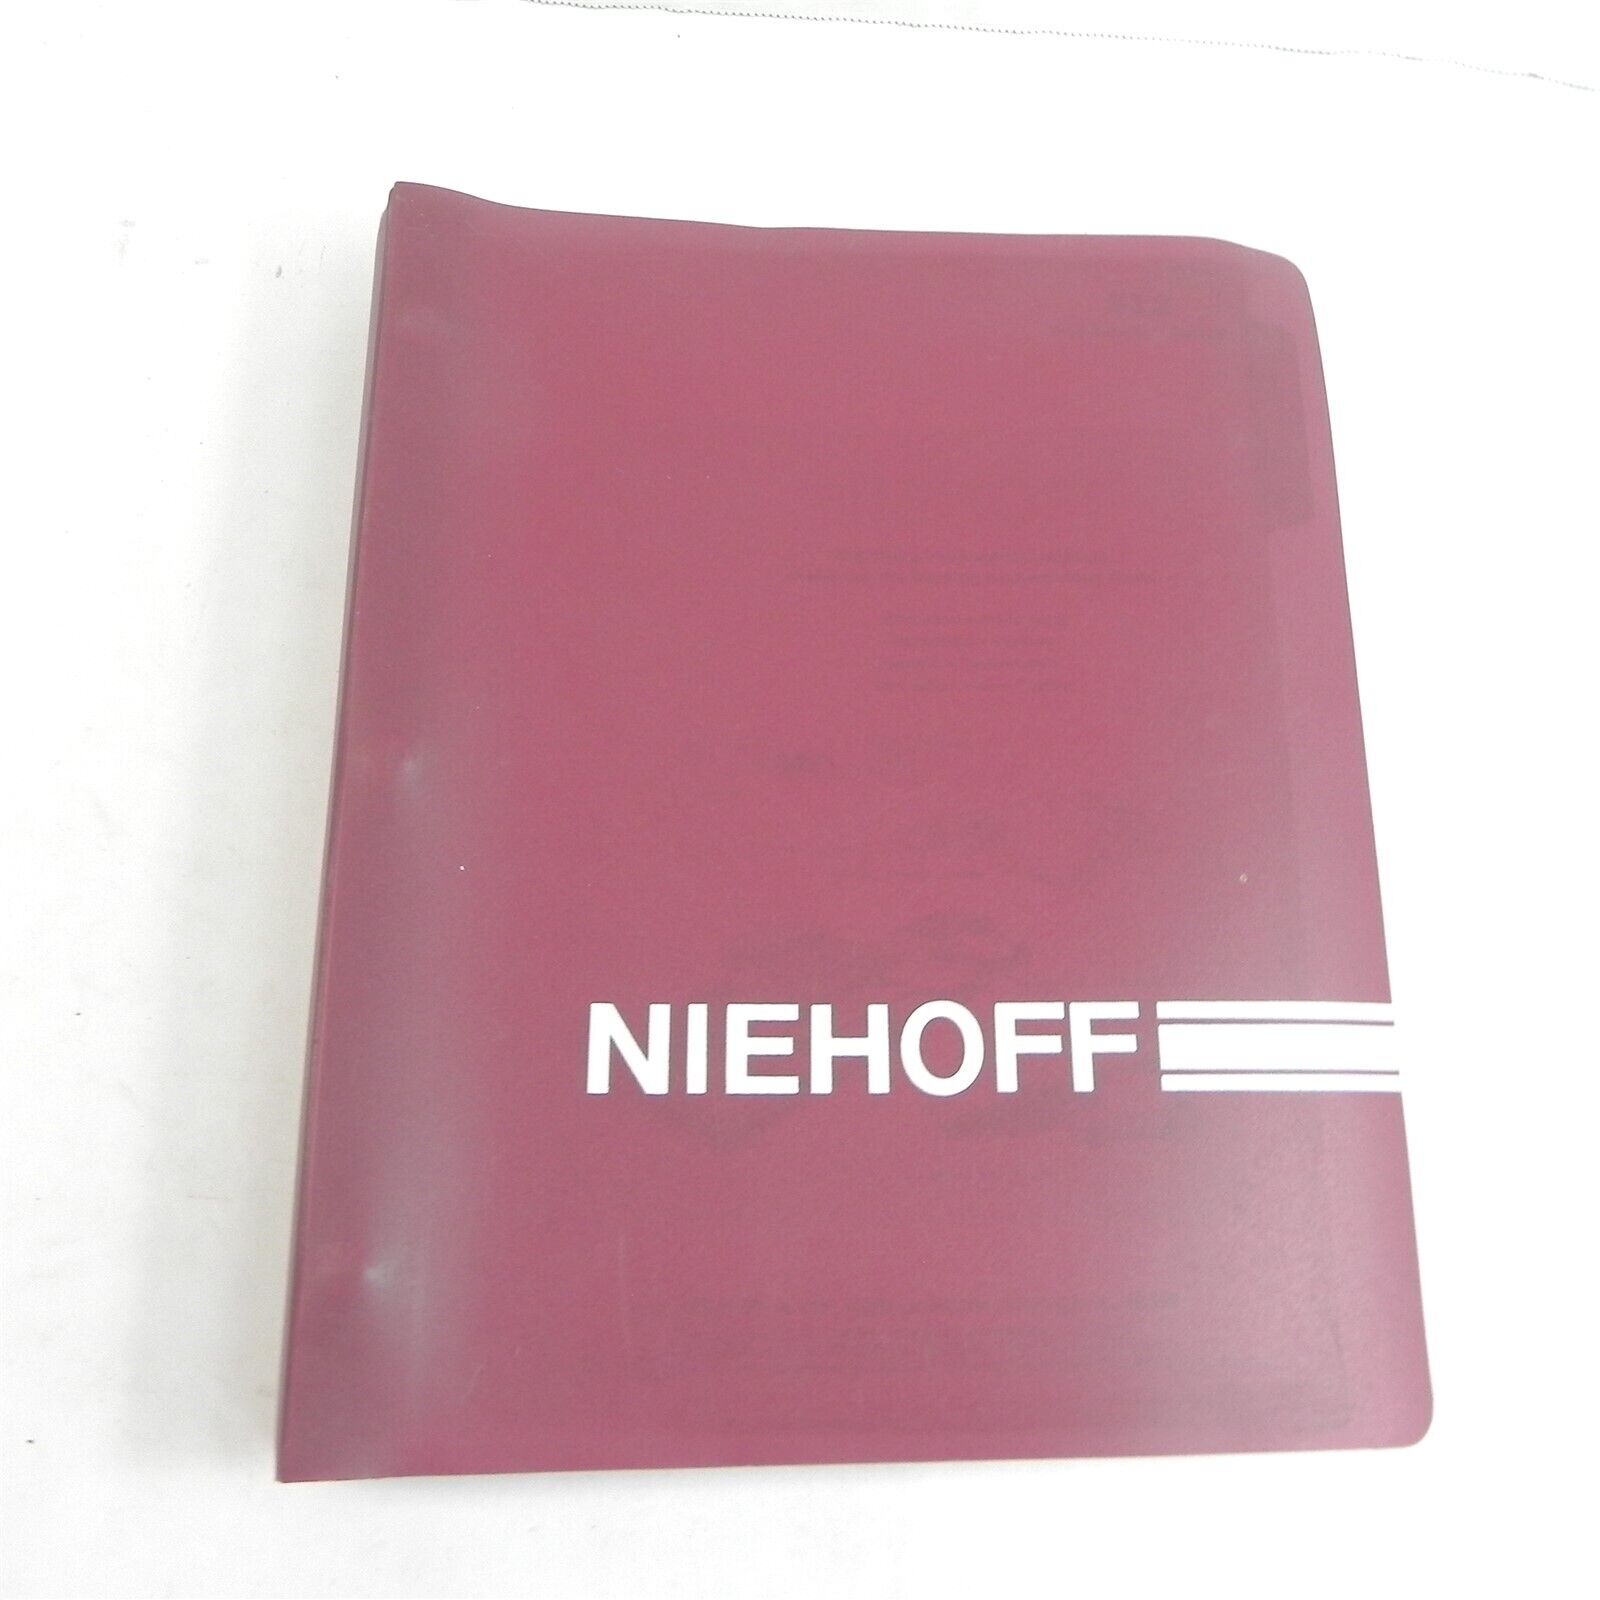 VINTAGE CE NIEHOFF PARTS AND ACCESSORIES BINDER CATALOG 1980S SERVICE GUIDE